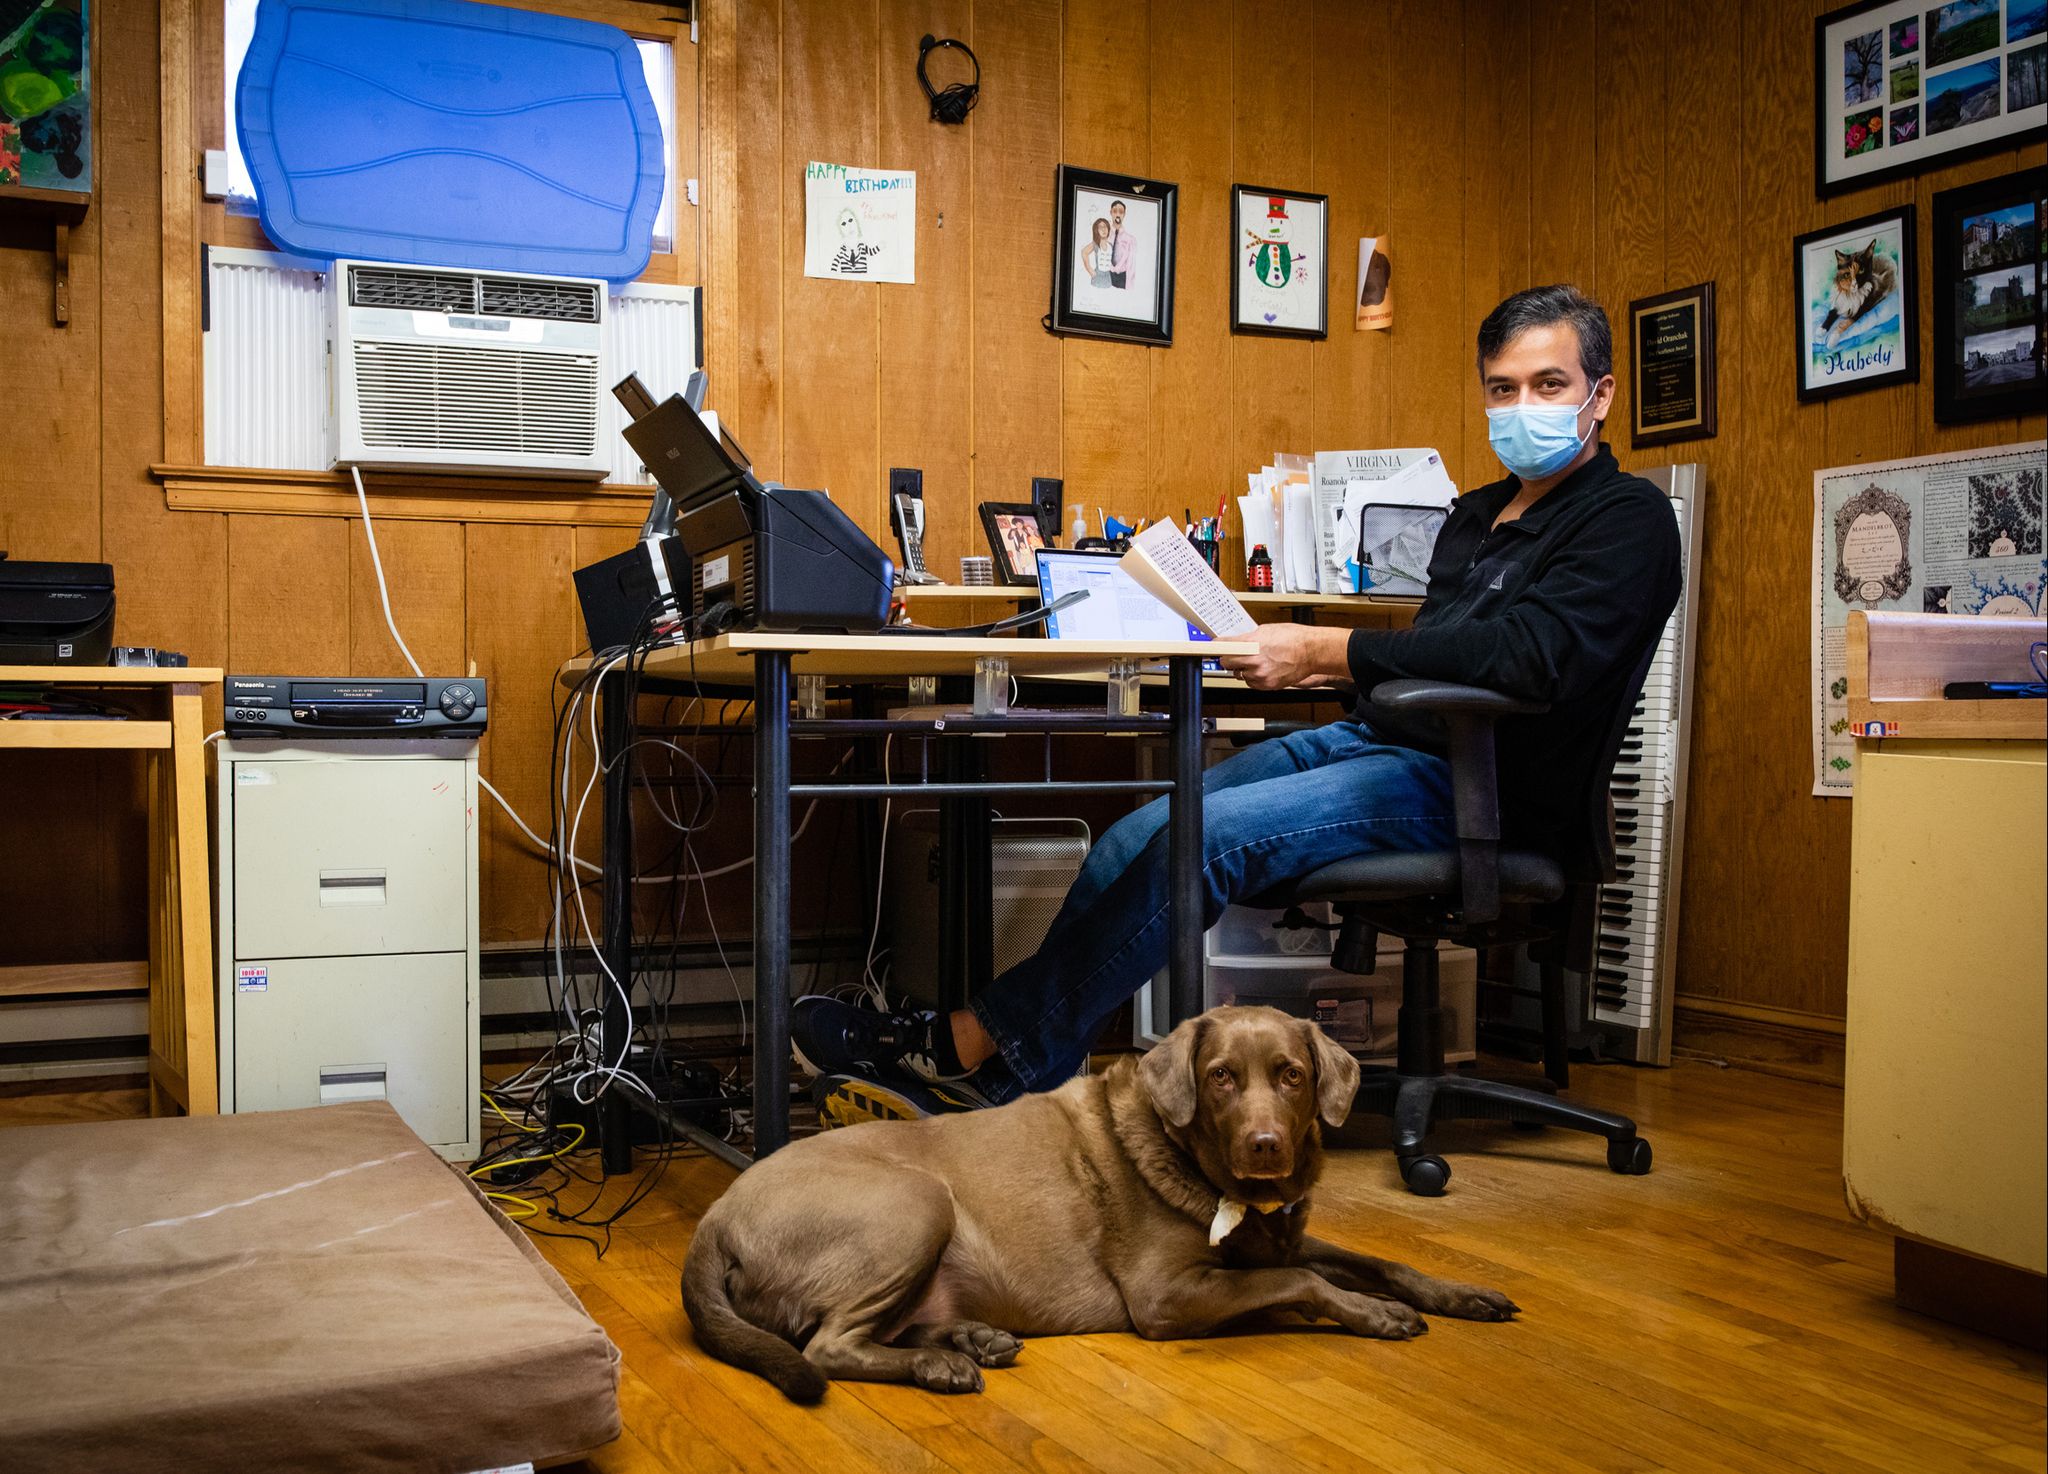 david oranchak at his computer with dog where he did most of his work to crack the code